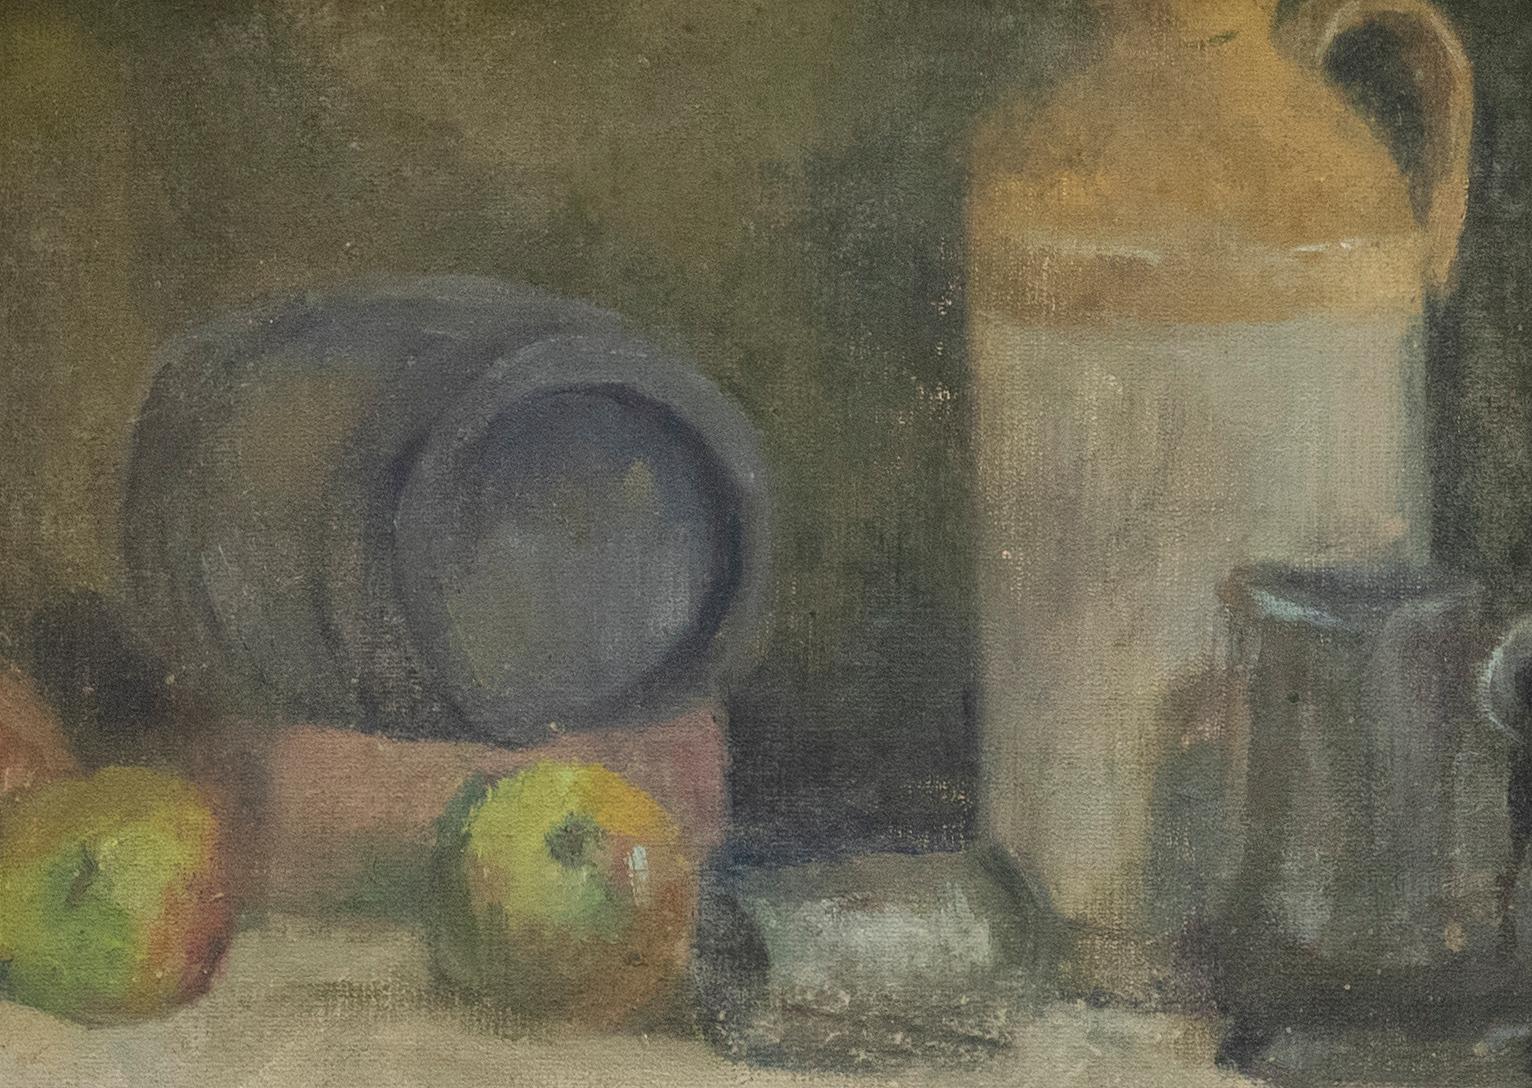 Framed 20th Century Oil - Still Life with Cider Apples - Painting by Unknown